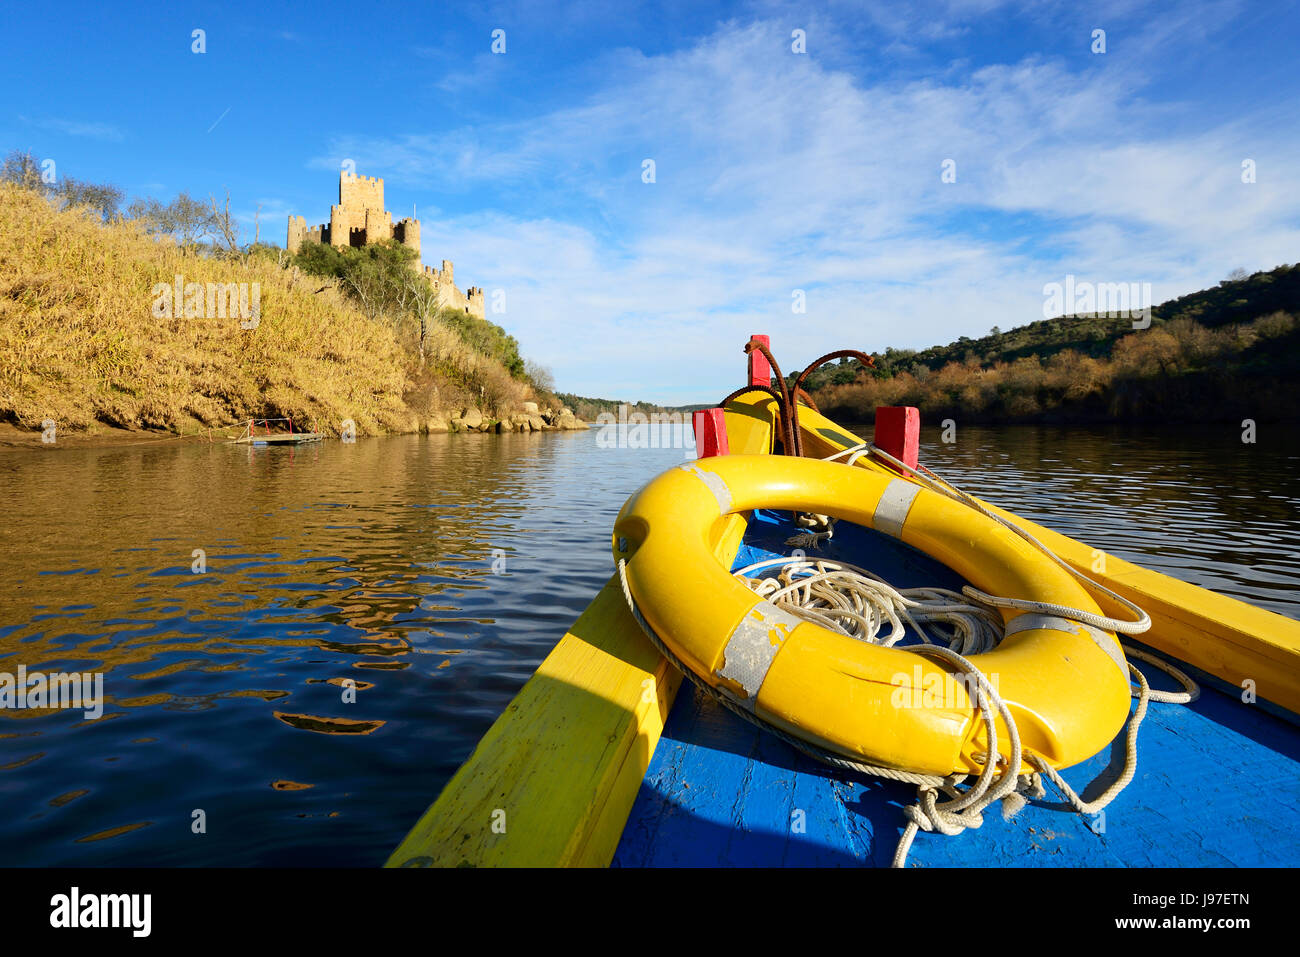 On a boat to reach the 12th century Templar castle of Almourol, in the middle of an island in the Tagus river, Portugal Stock Photo